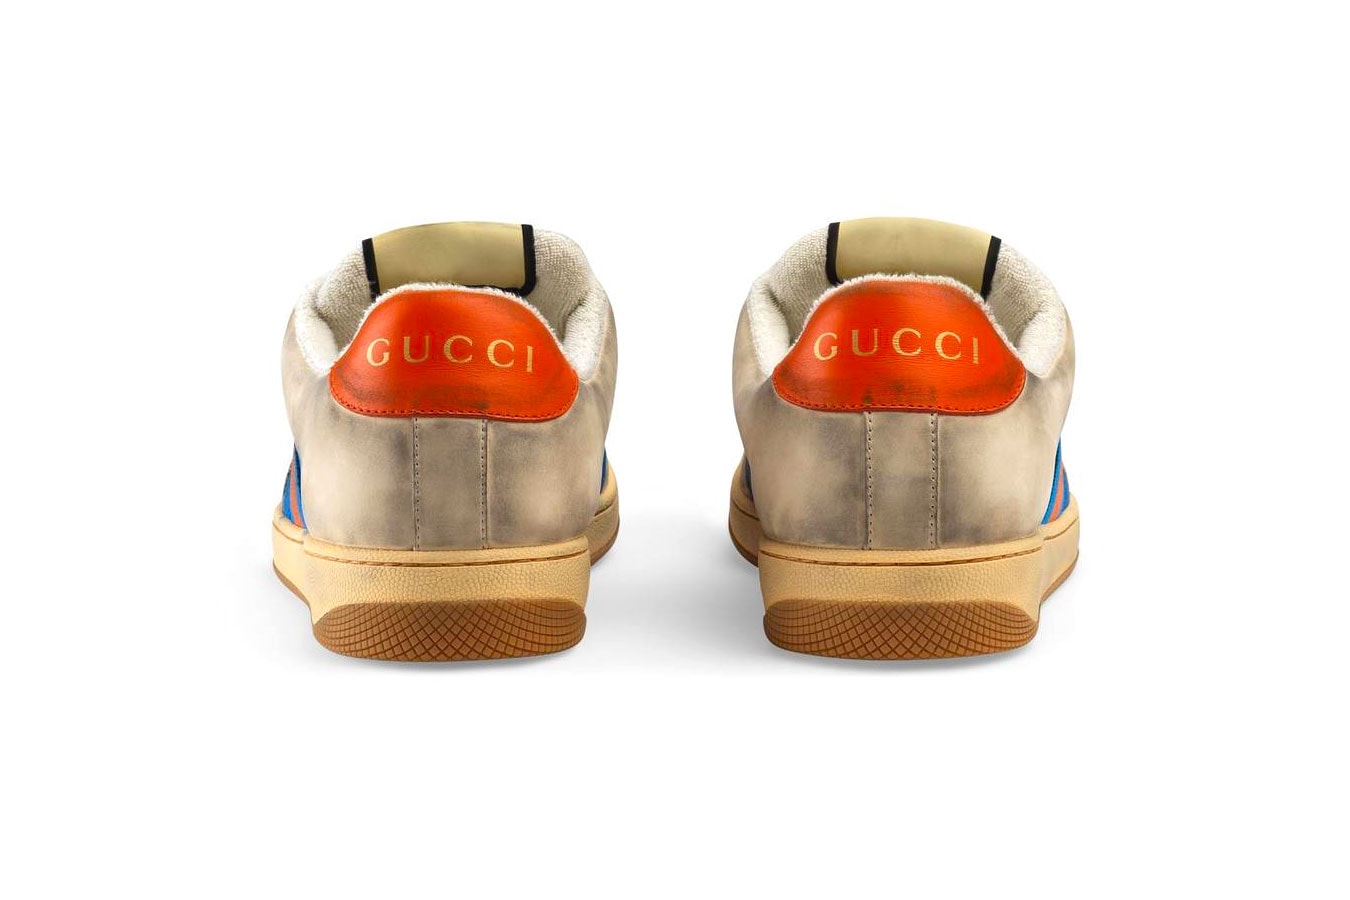 Buy Gucci Gg Supreme Shoes: New Releases & Iconic Styles